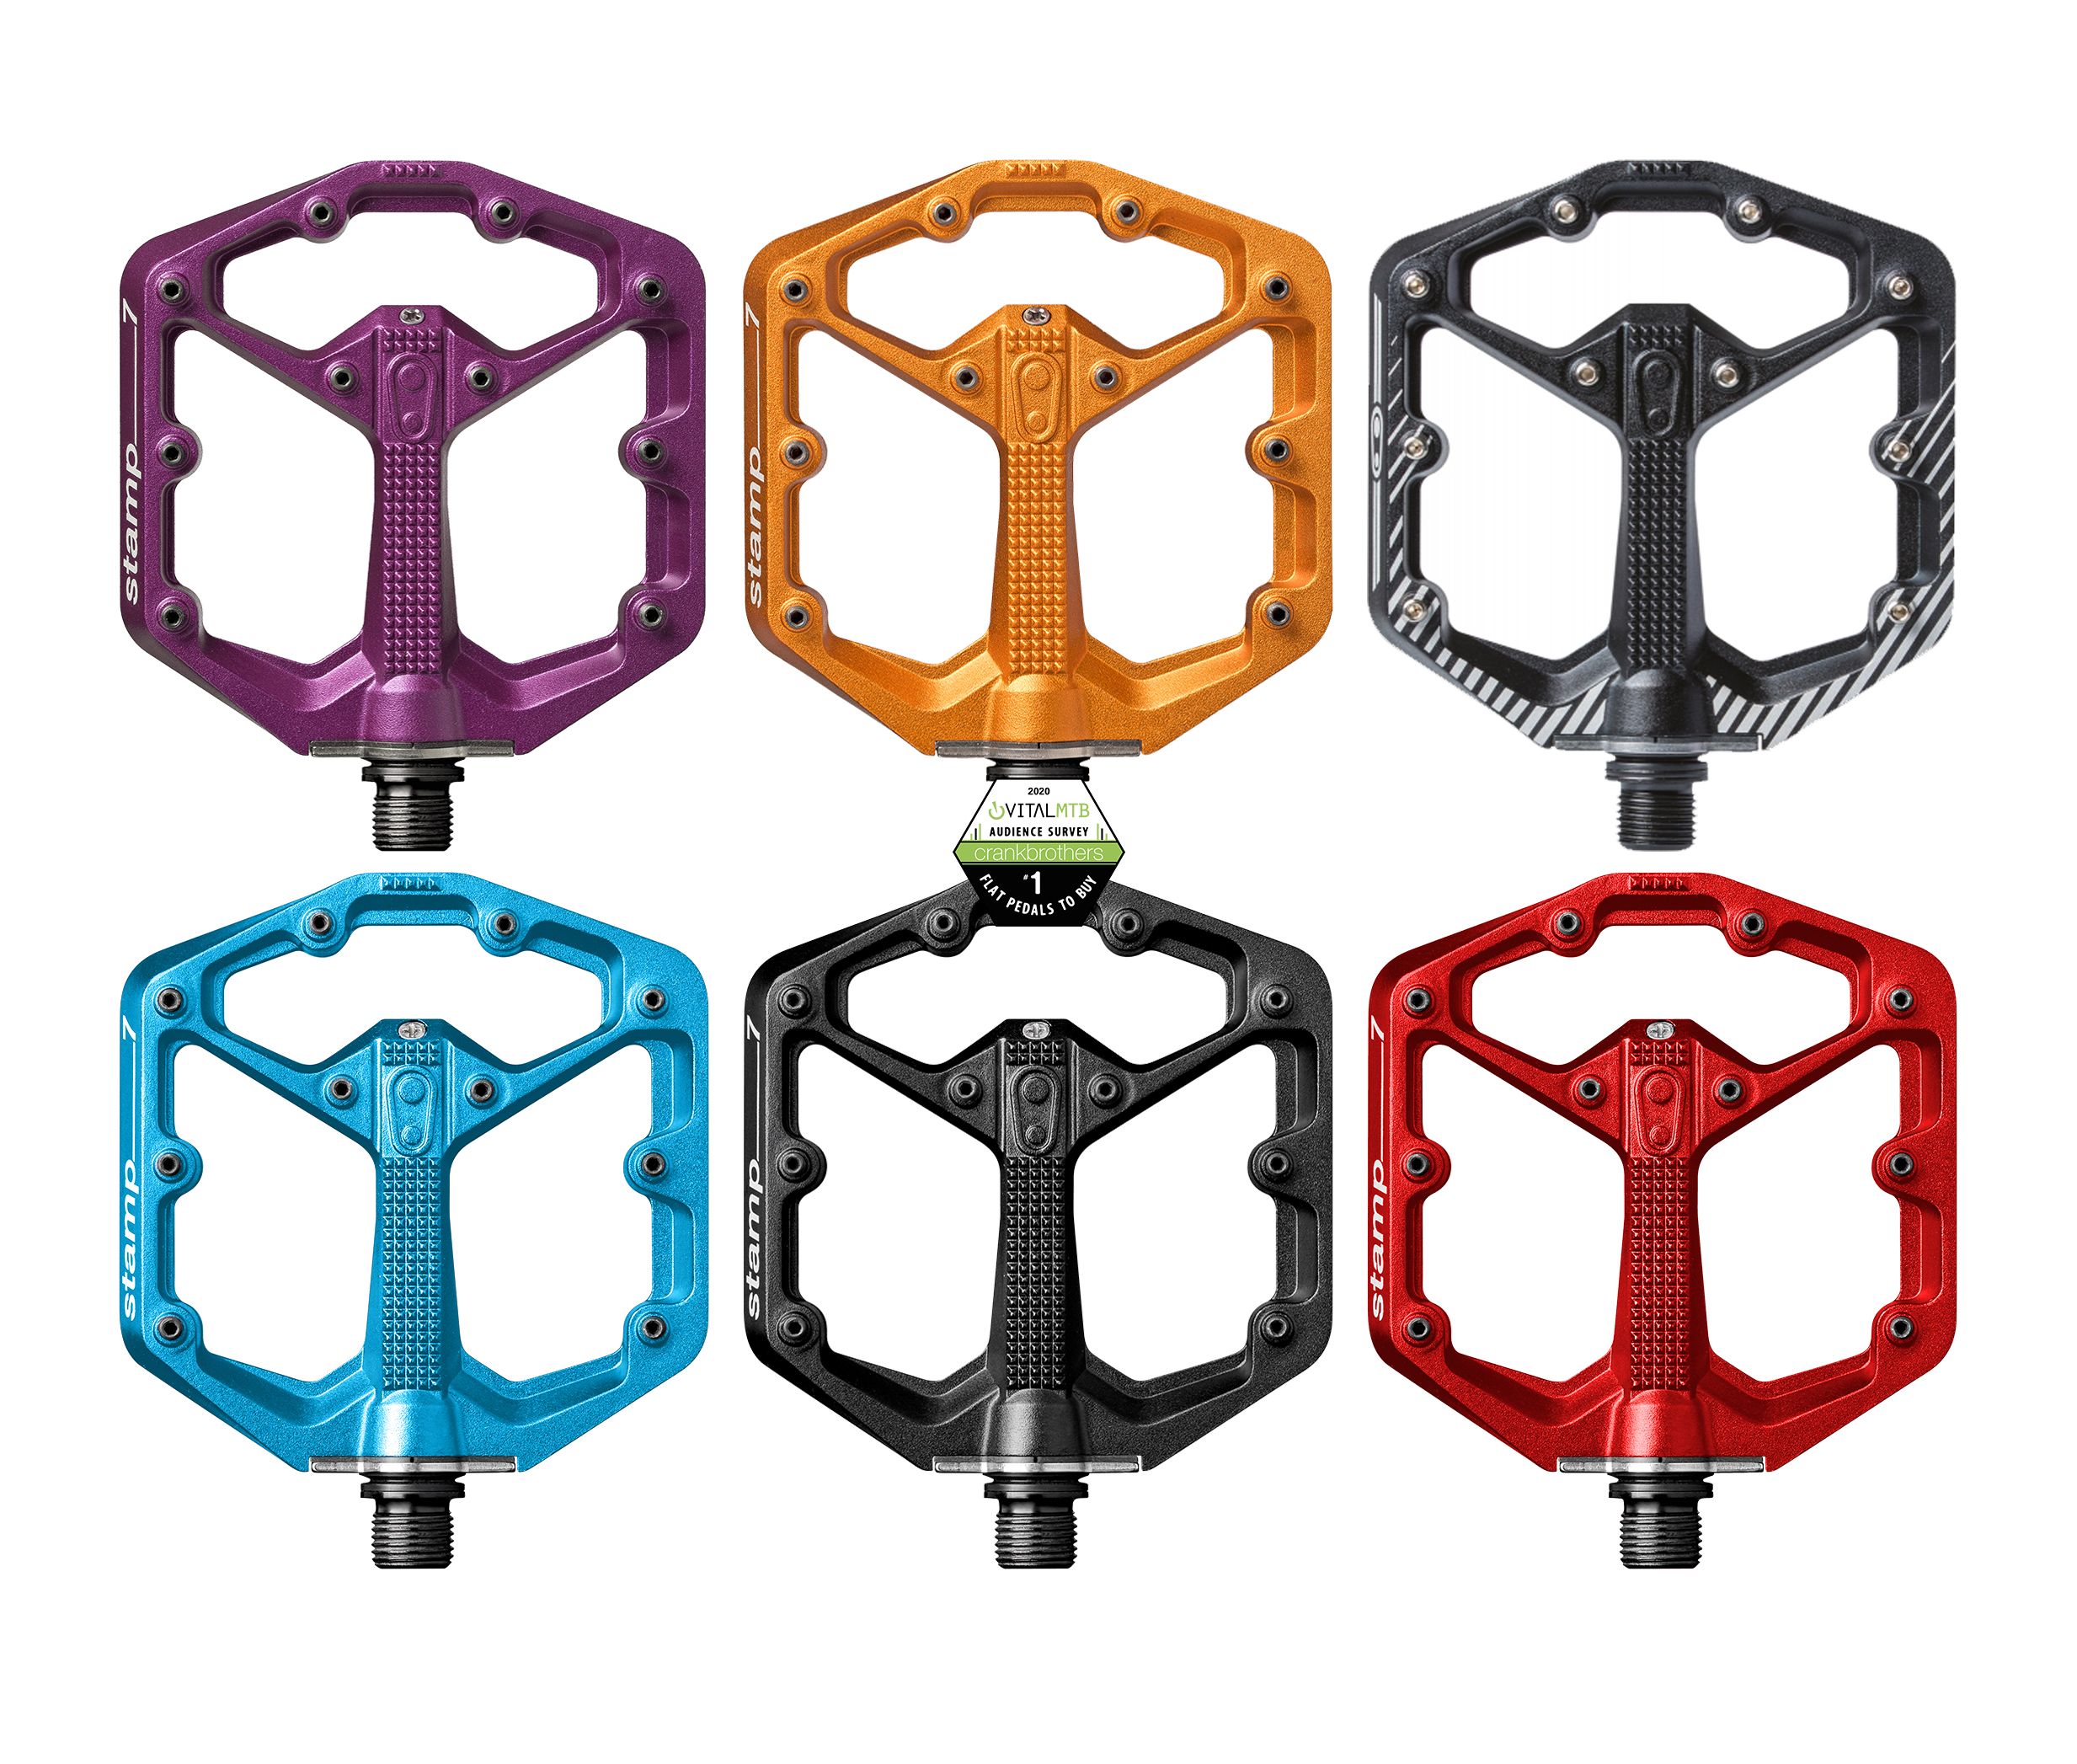 Crankbrothers Stamp 7 Small Flat Pedals - £161.99, Pedals - Mountain/Bmx  Flat